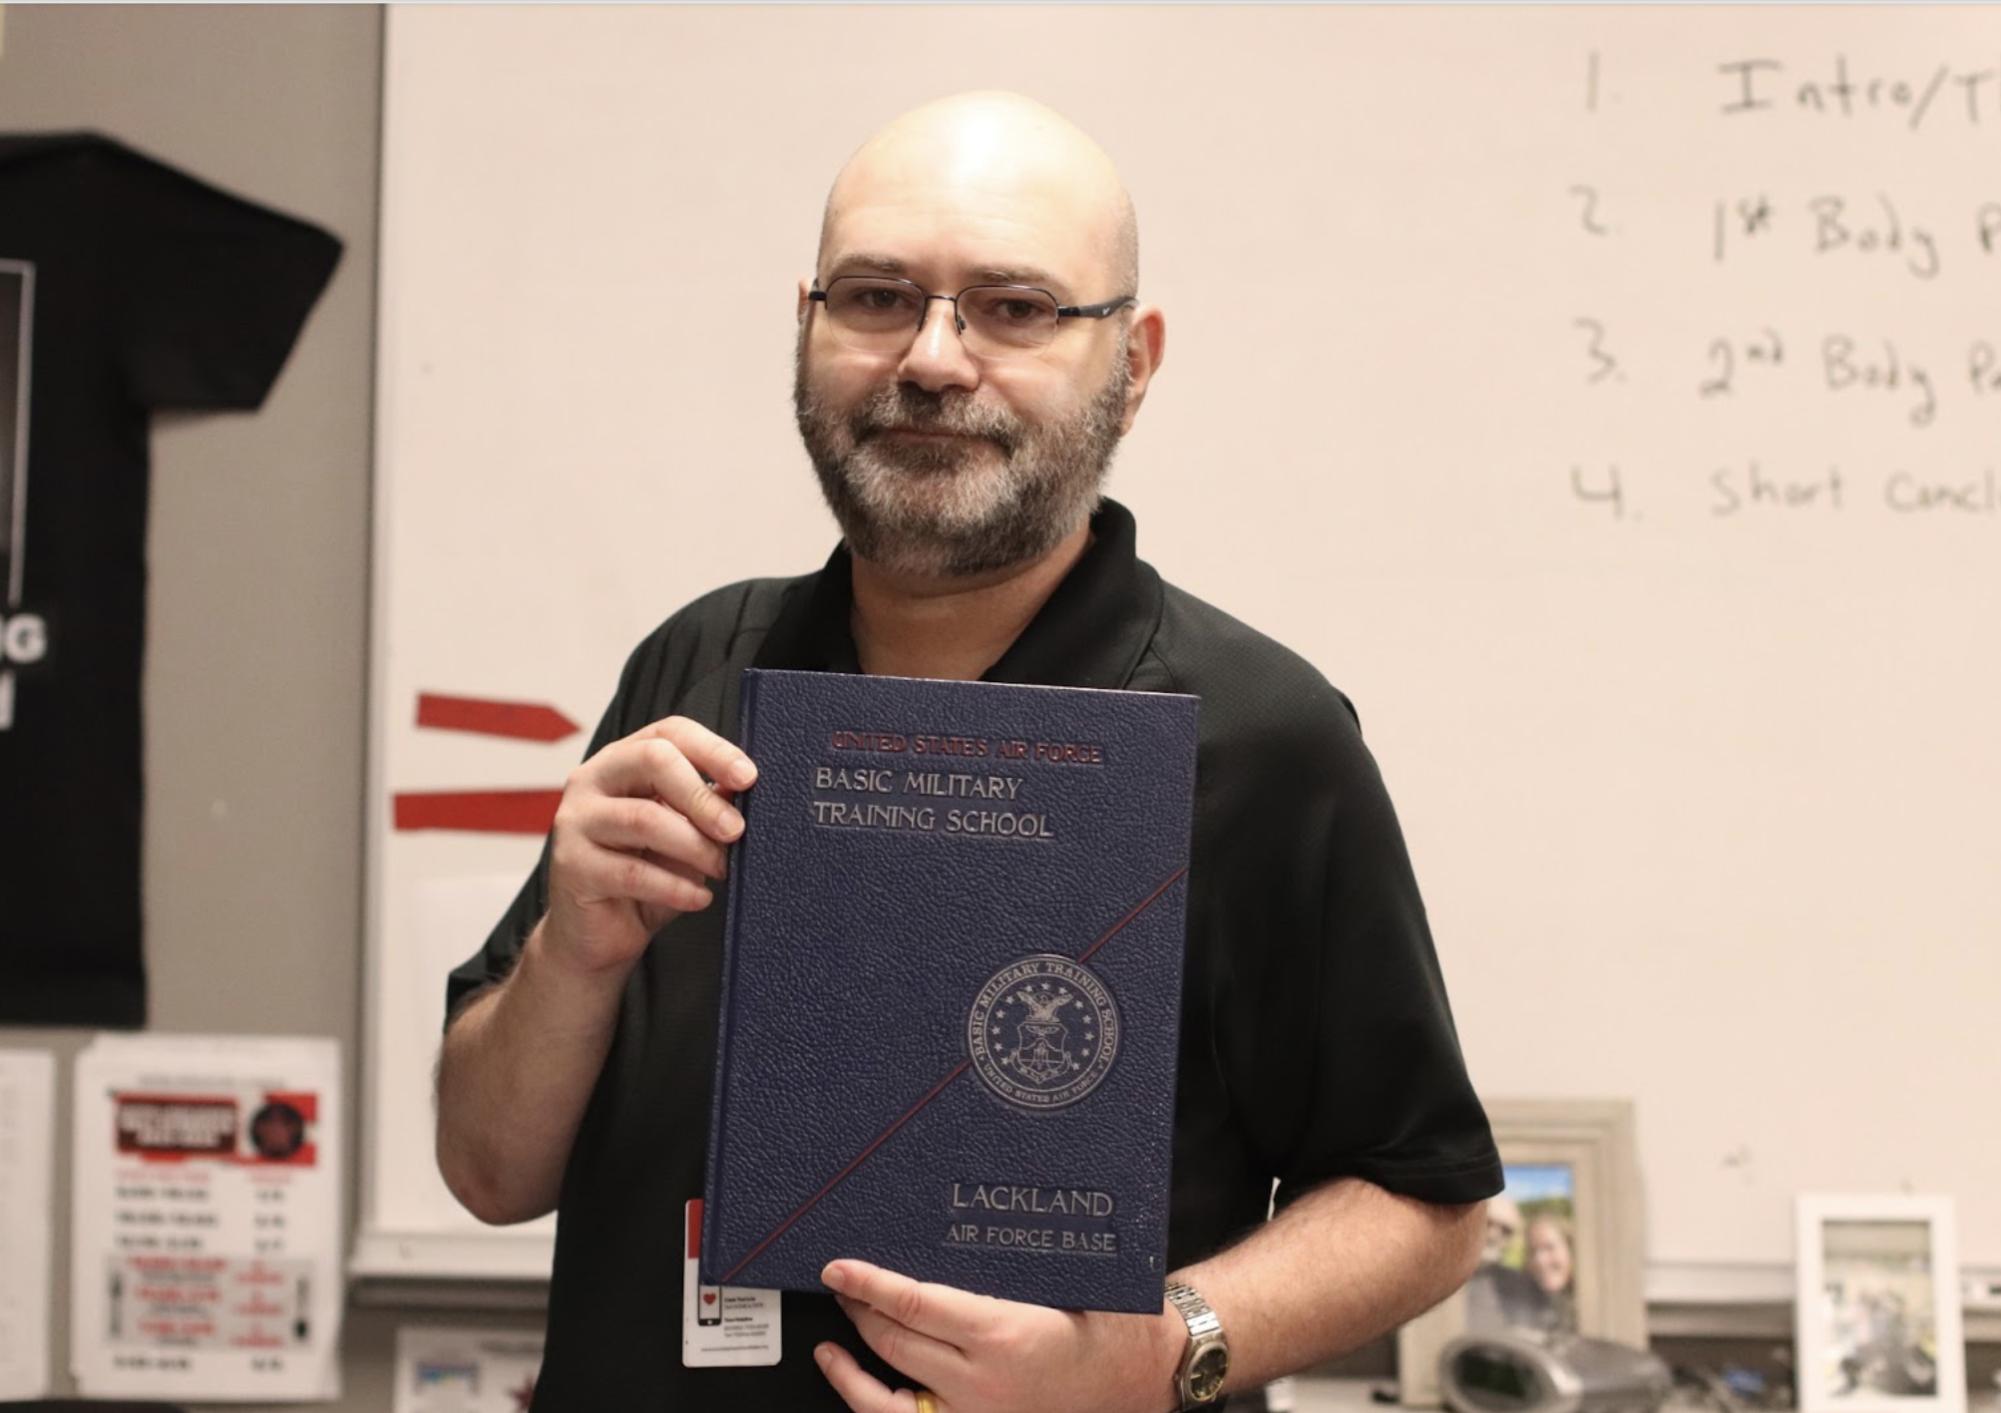 Coppell English II teacher David Poskey holds the yearbook of the United States Air Force Basic Military Training School as a reflection of his life that has led him to where he is now. Poskey has been selected as The Sidekick’s Volume 35 No. 2 Teacher of the Issue.